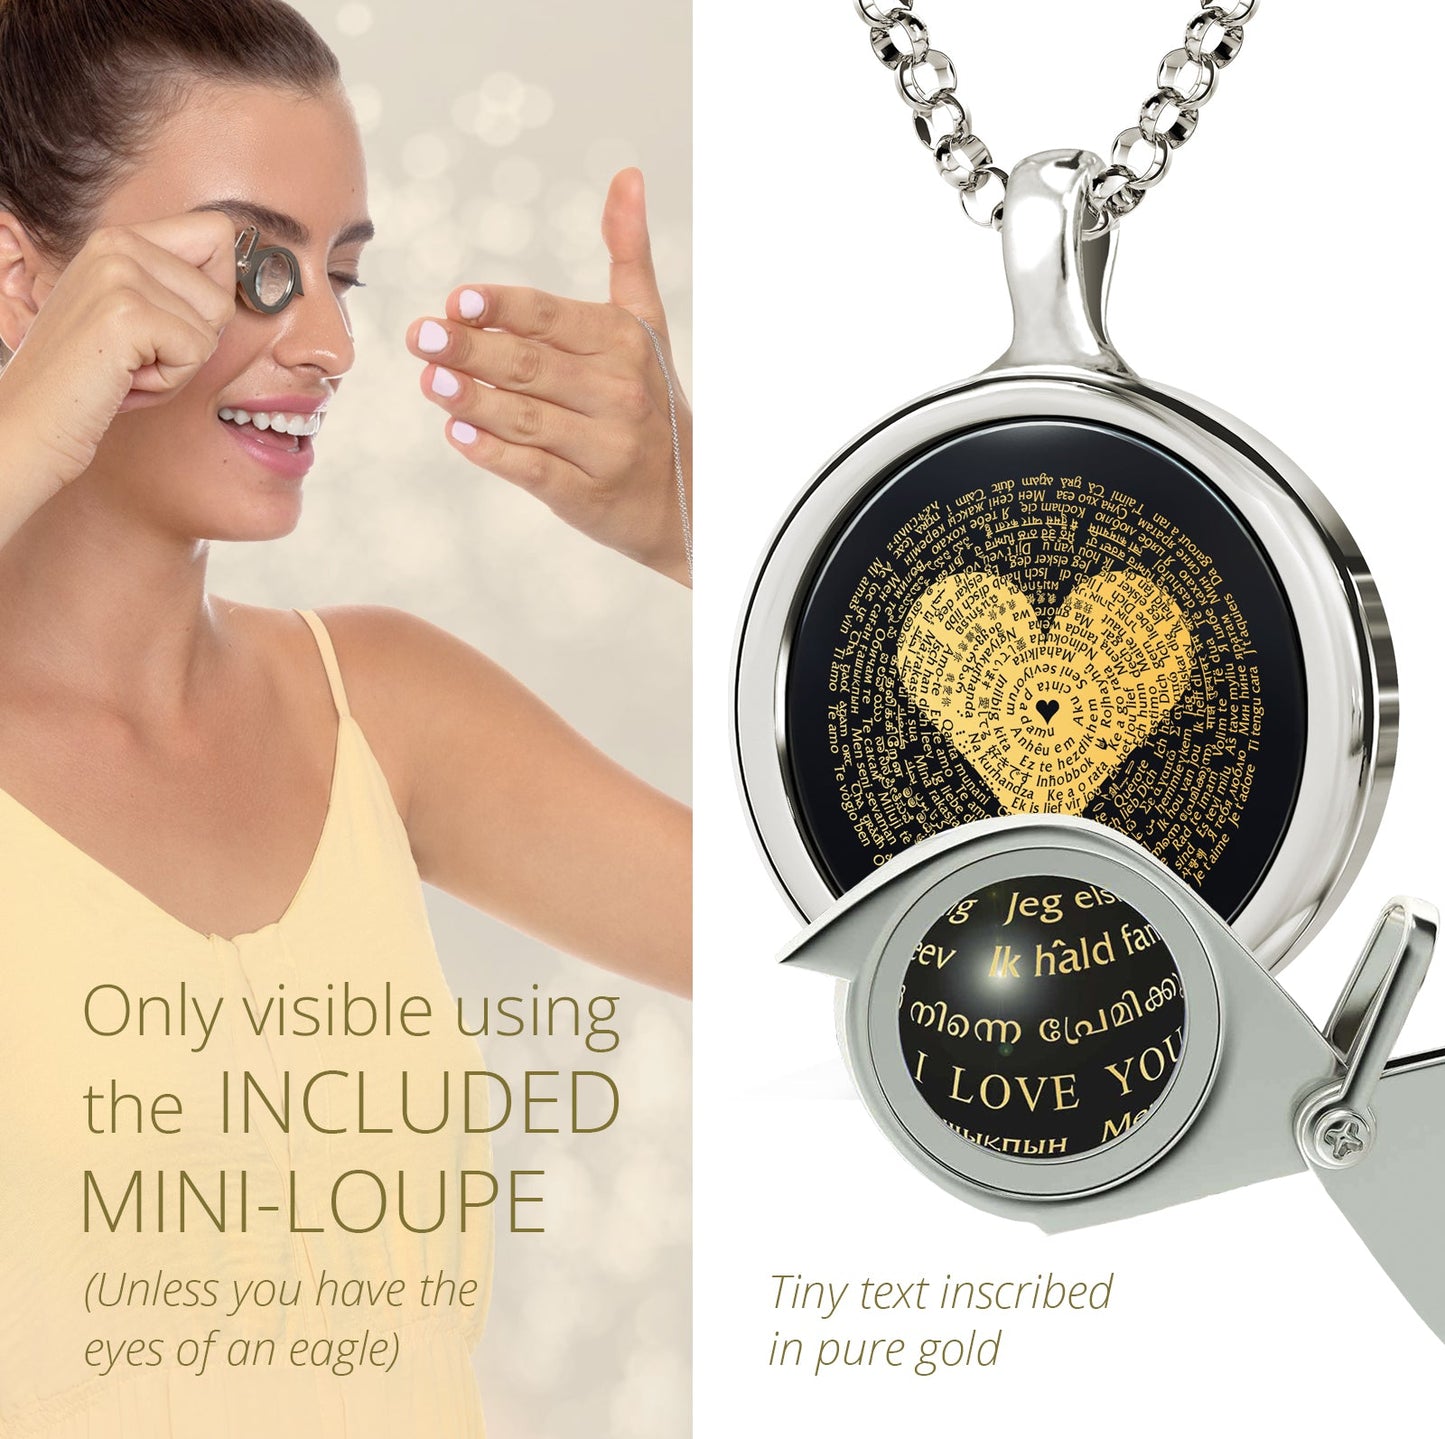 A Multilingual I Love You Necklace with 24k Gold Inscriptions and Crystal Heart Earrings by Maramalive™.